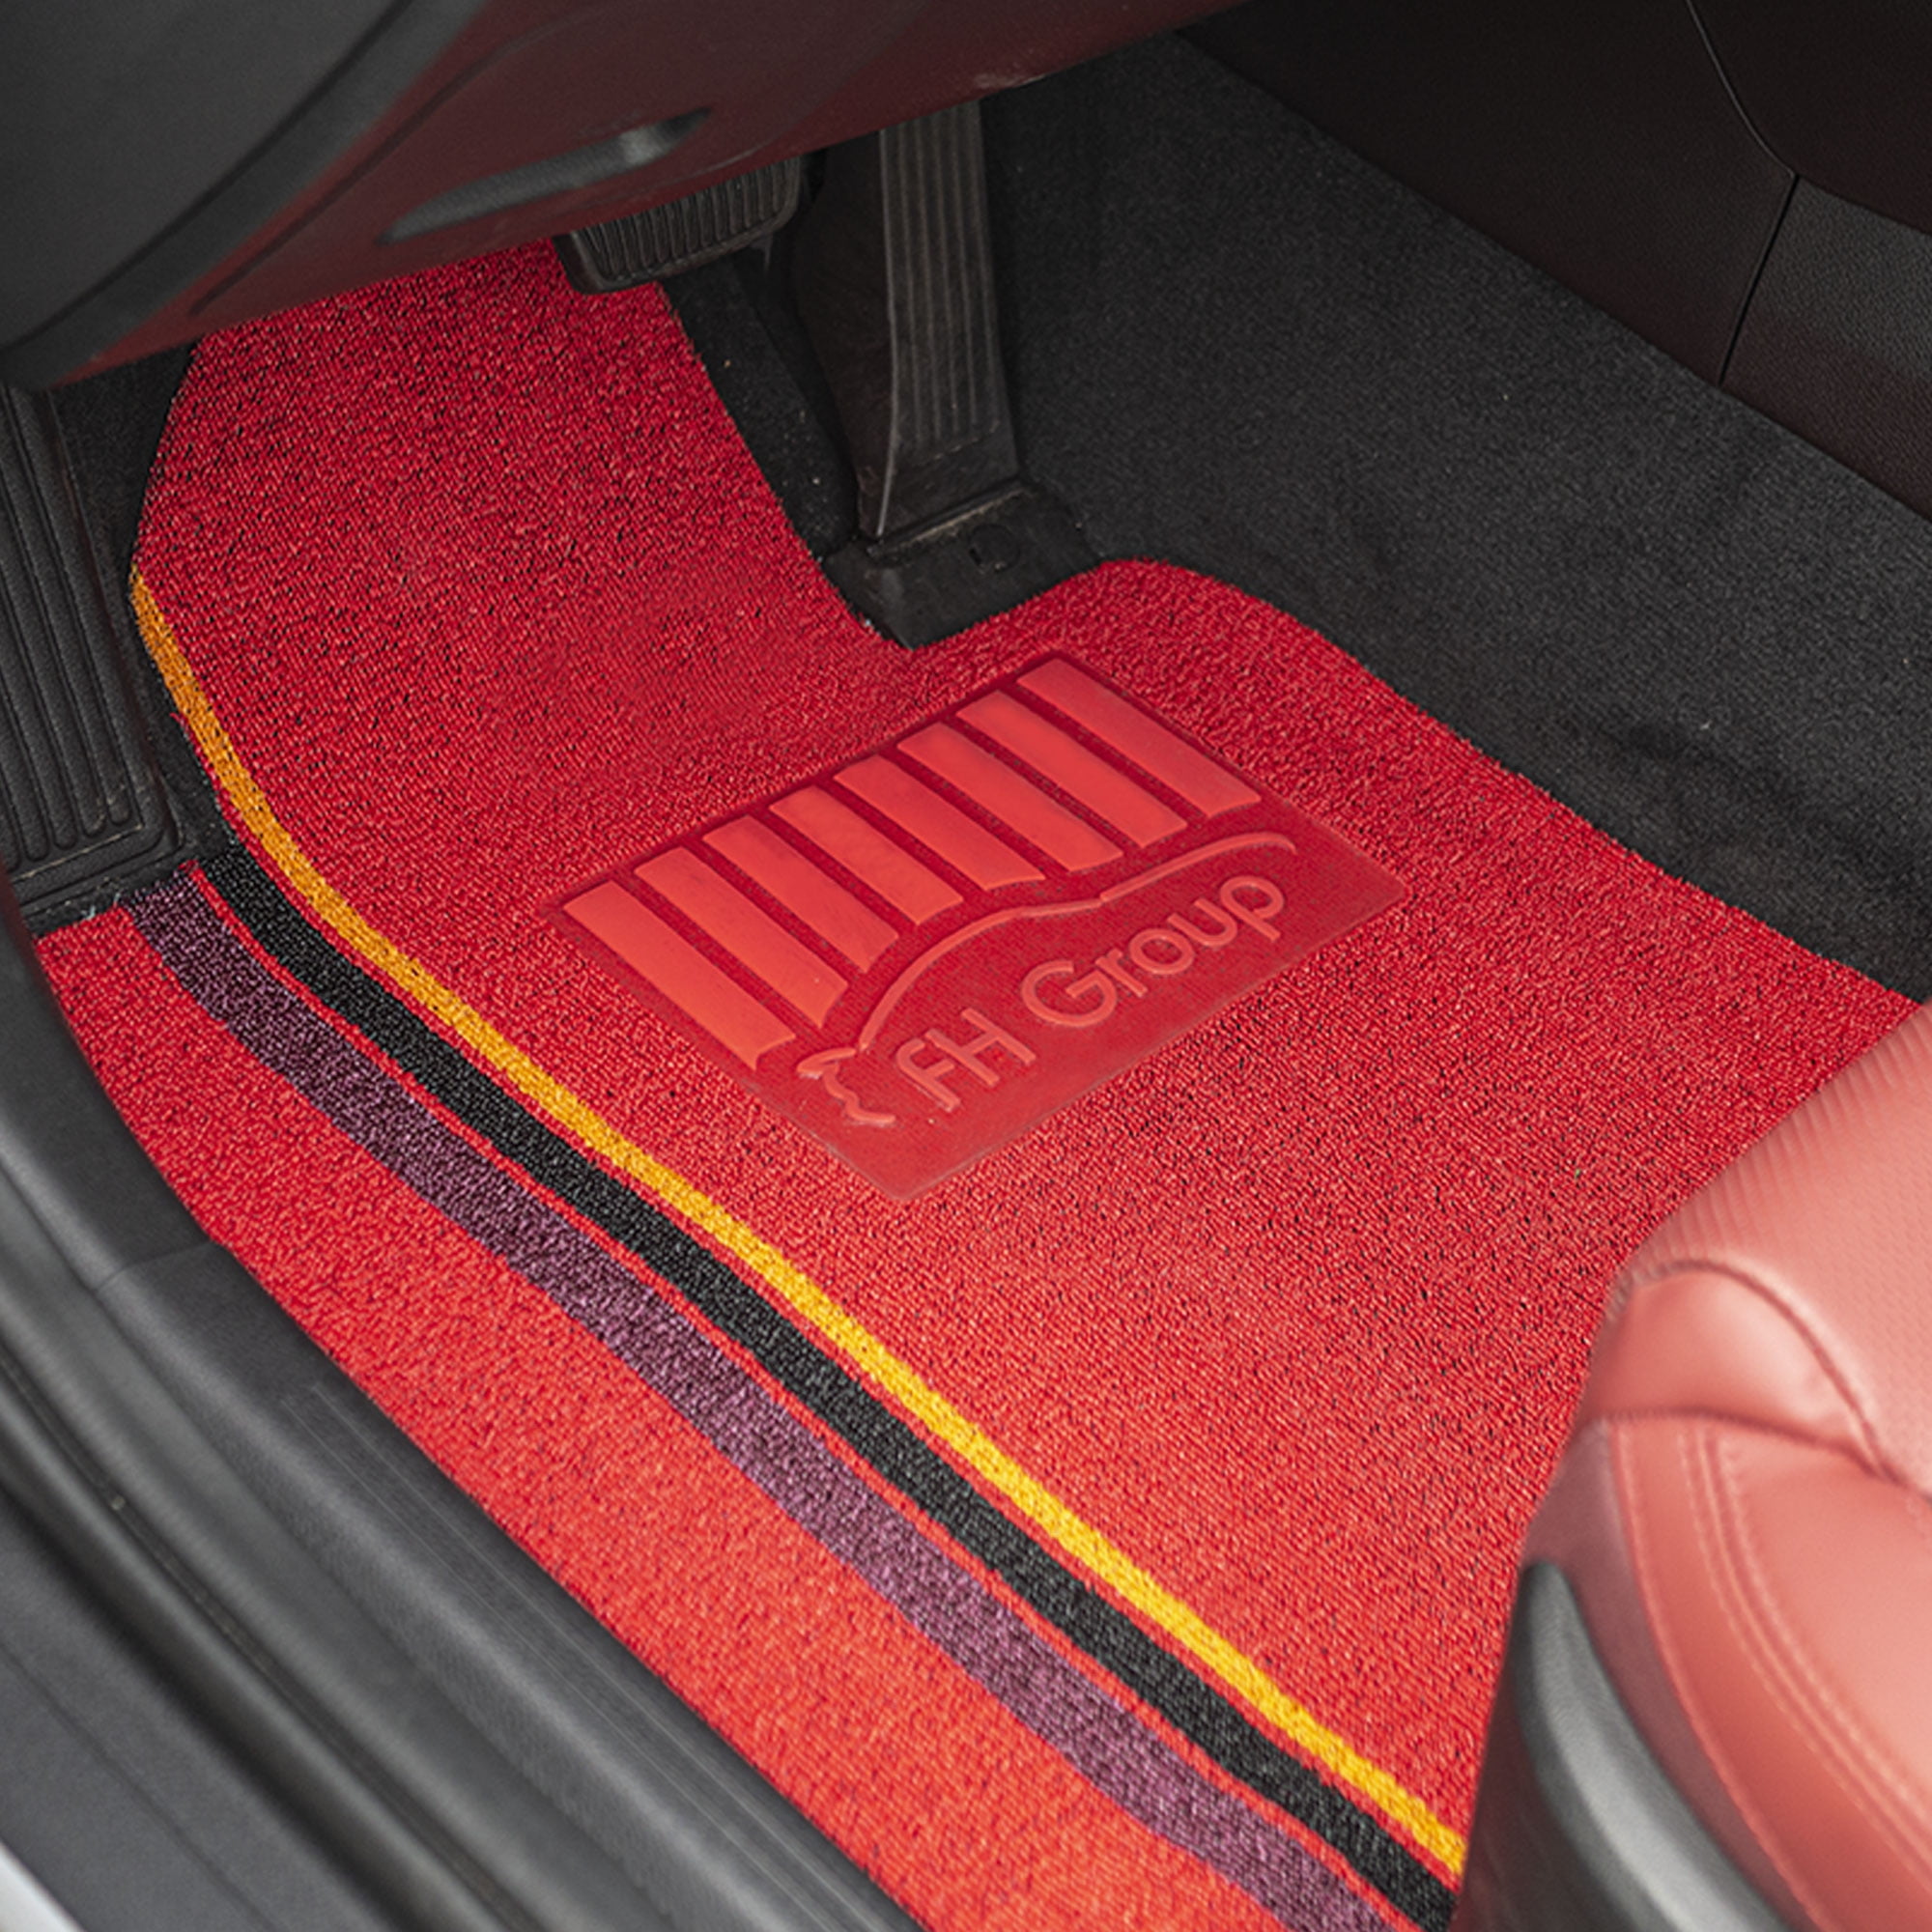 FH Group Burgundy Heavy Duty Liners Trimmable Touchdown Floor Mats -  Universal Fit for Cars, SUVs, Vans and Trucks - Full Set DMF11511BRGNDY -  The Home Depot